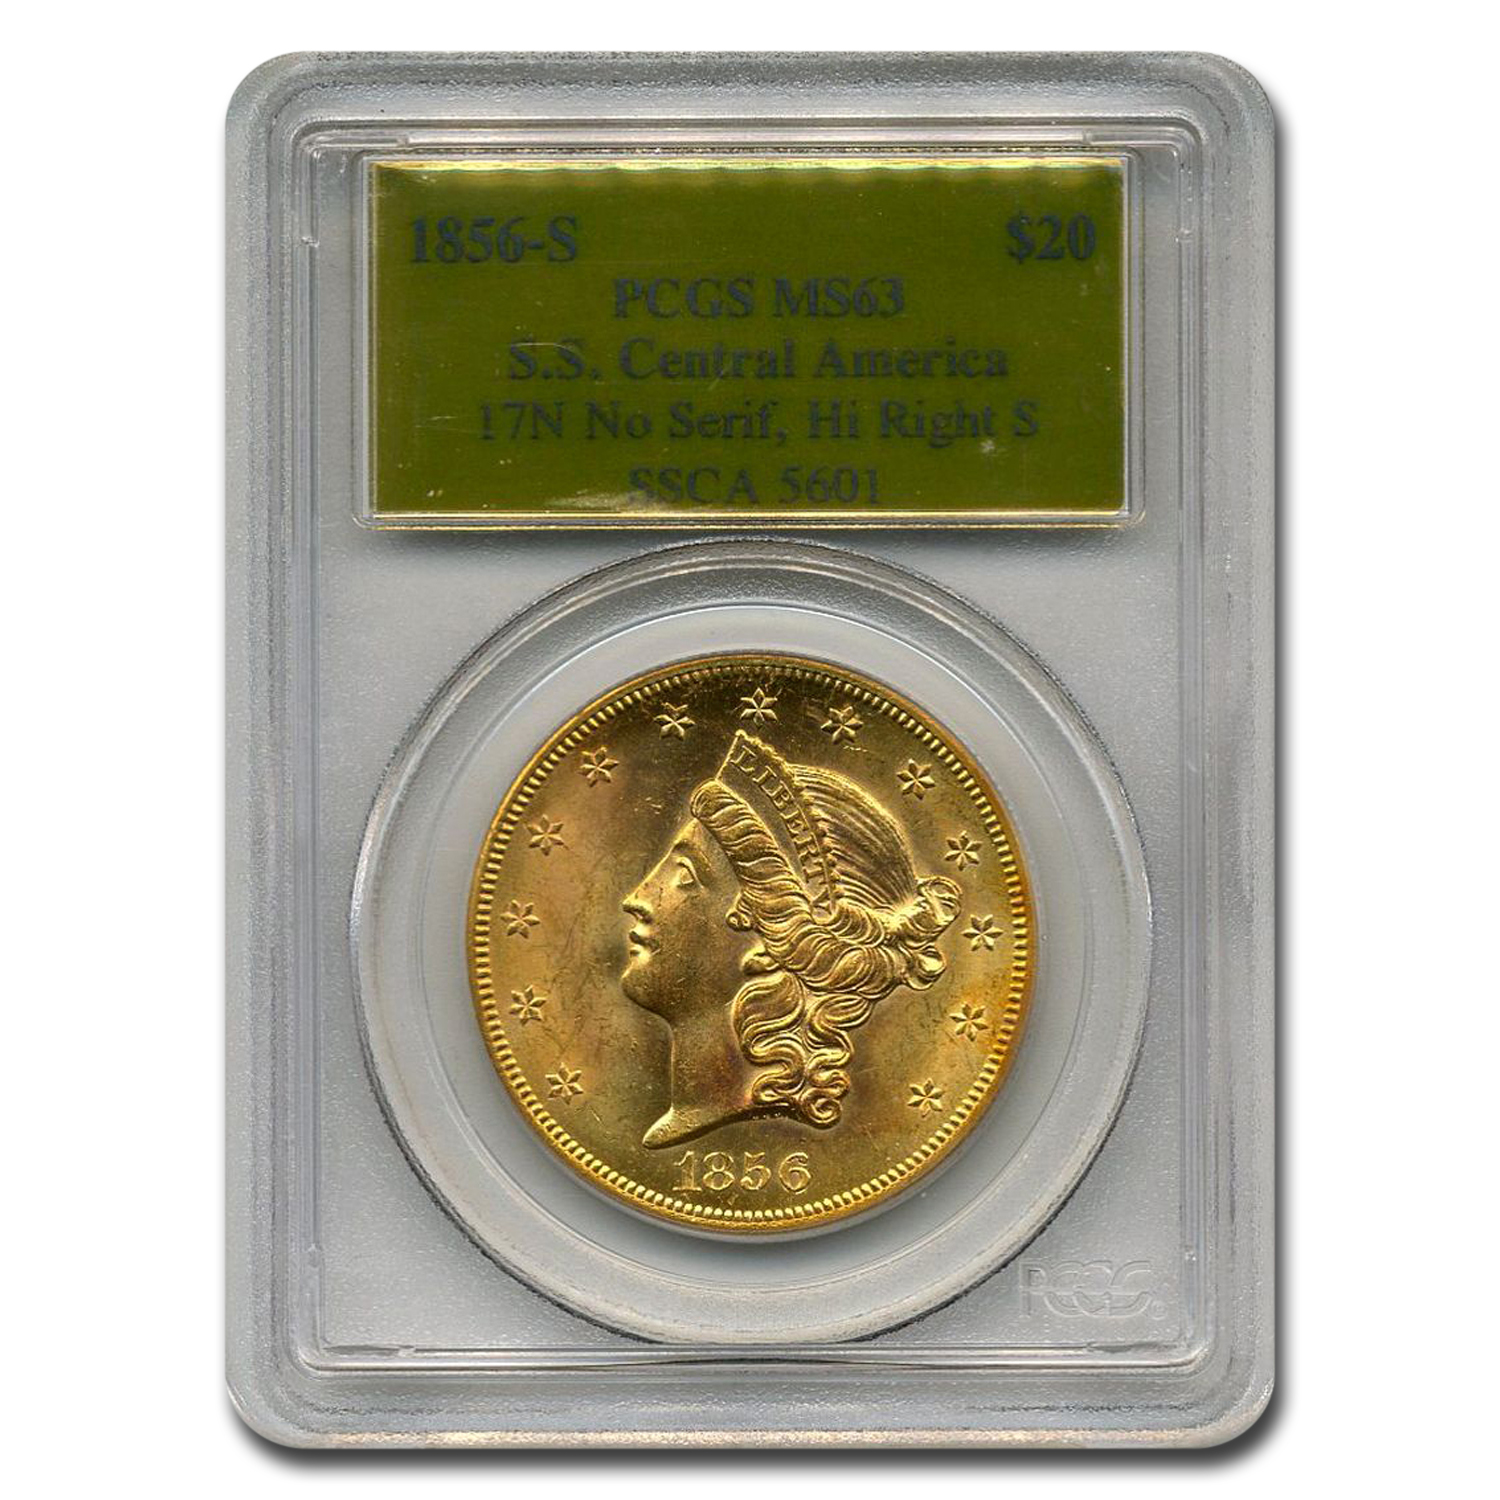 Buy 1856-S $20 Liberty Gold Double Eagle MS-63 PCGS (Central America)